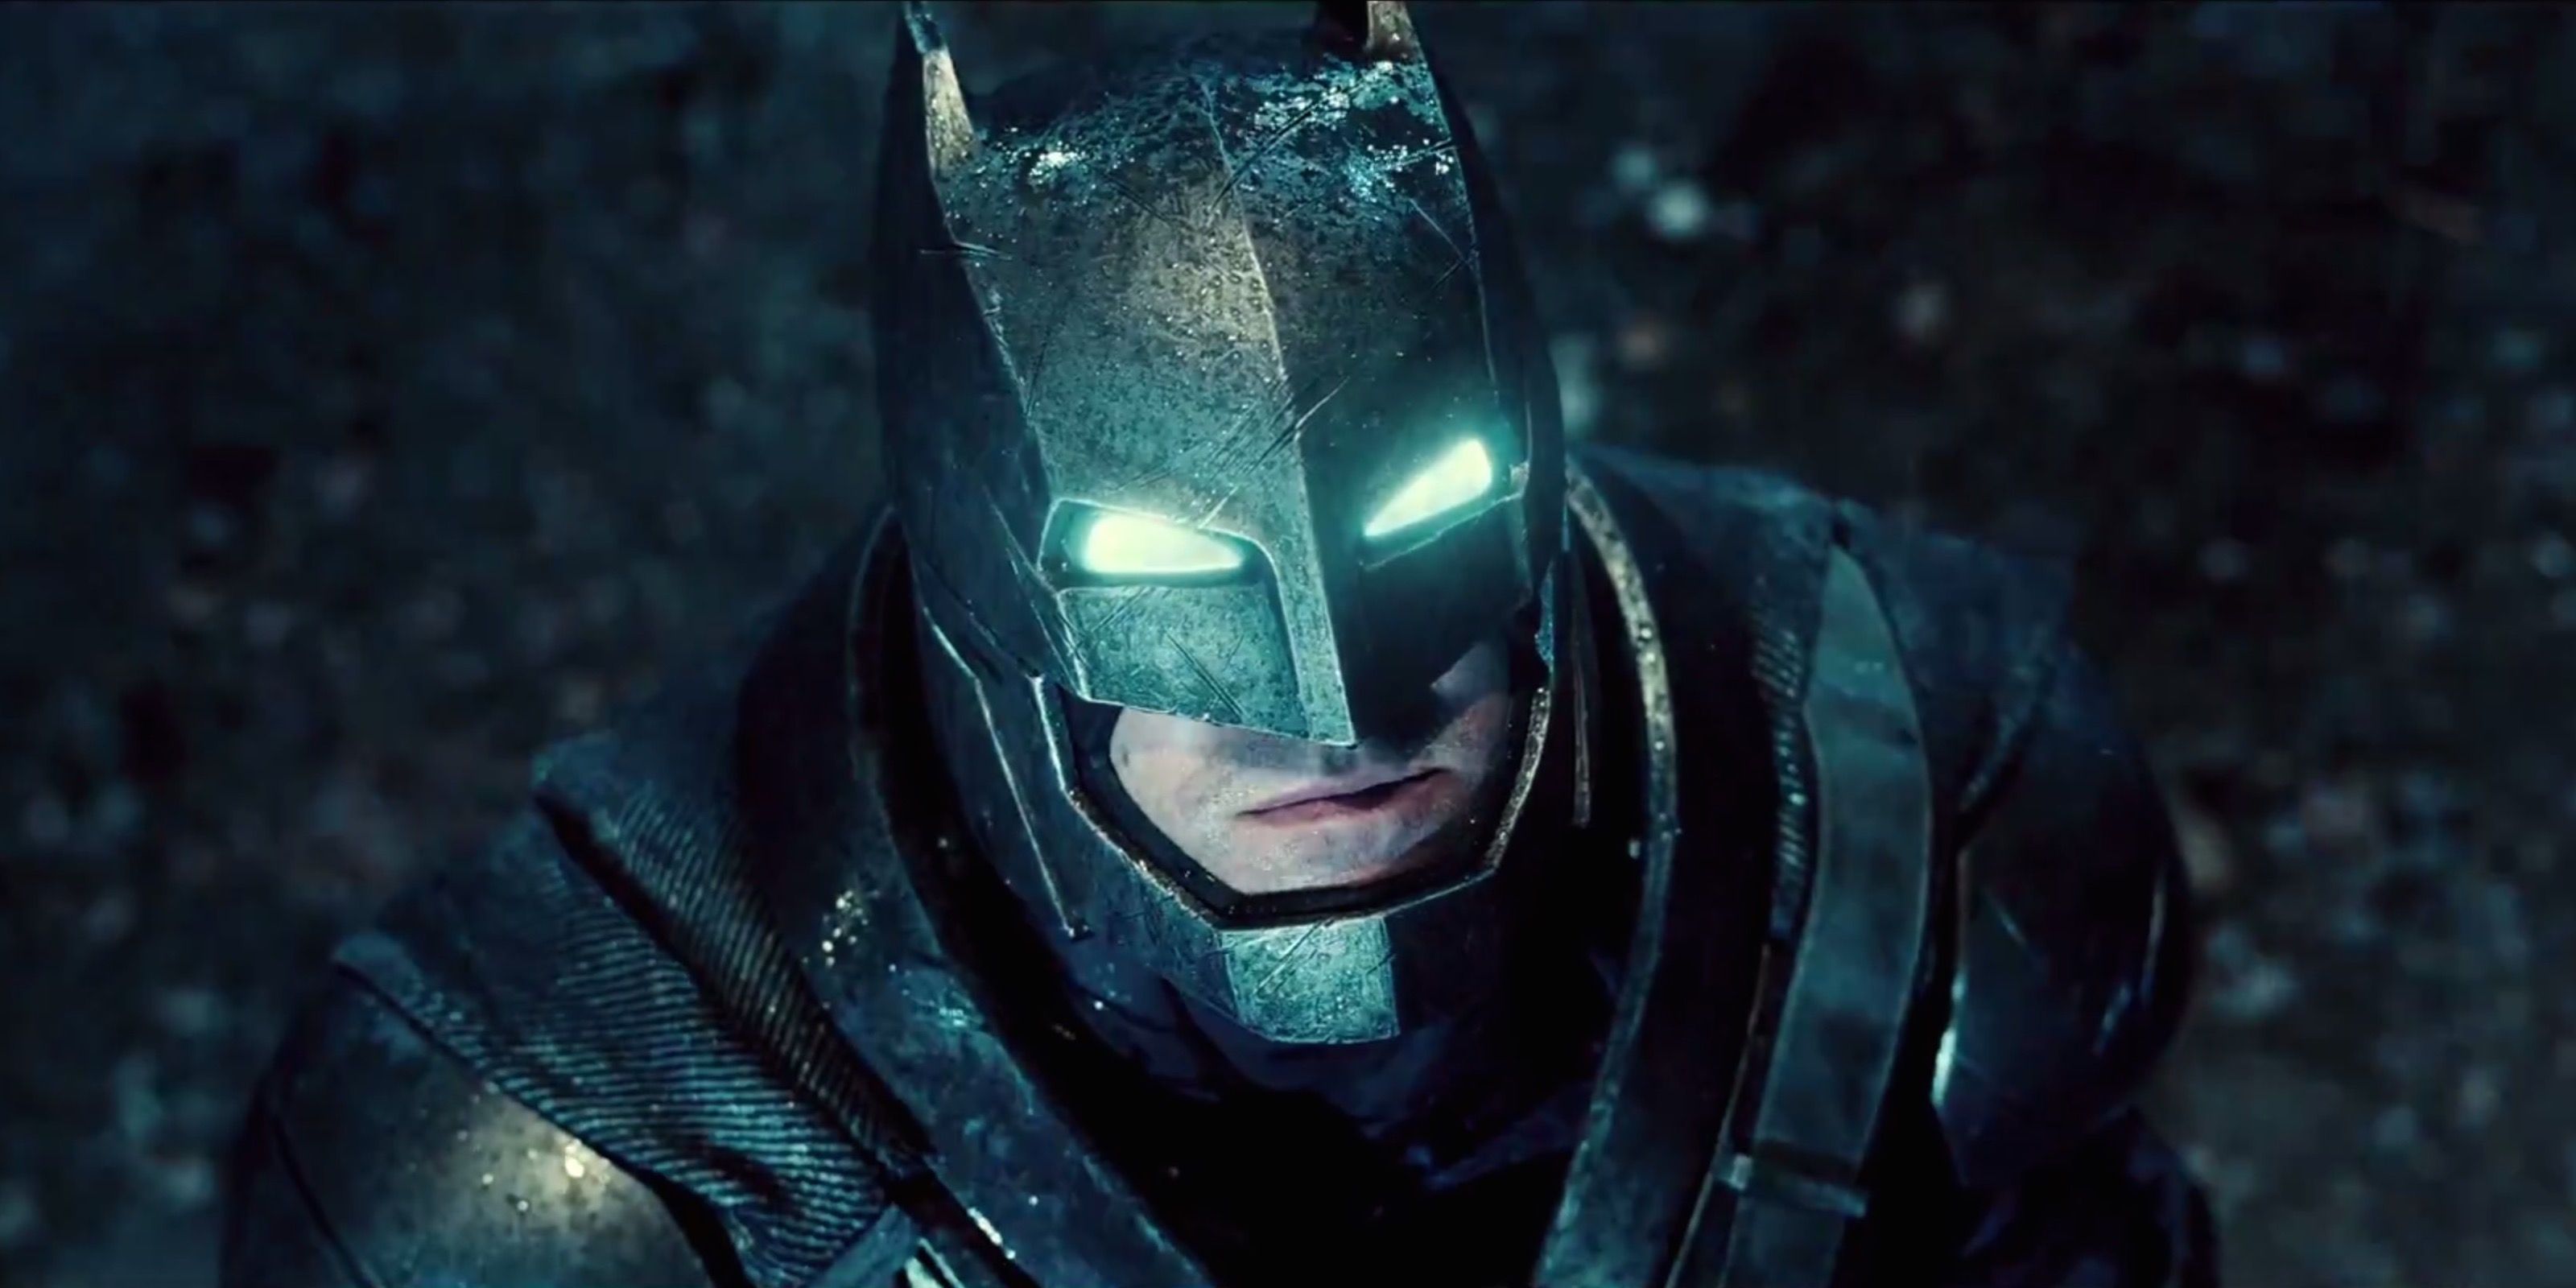 Batman Solo Movie with Ben Affleck Confirmed to Star & Direct